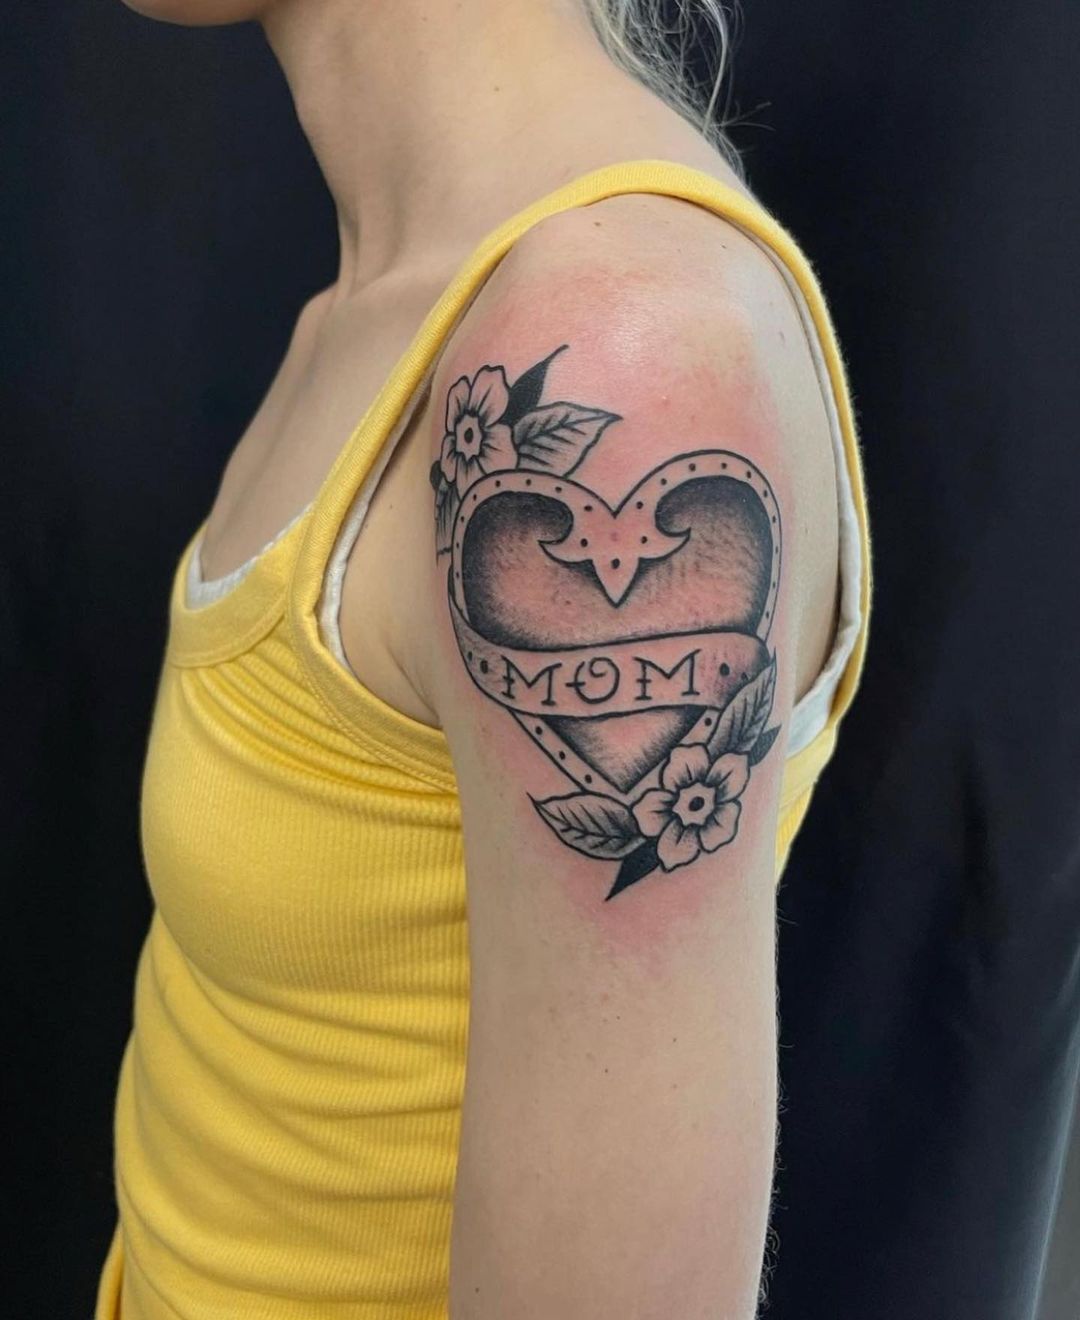 saint tattoo knoxville: rip mom tattoos for girls